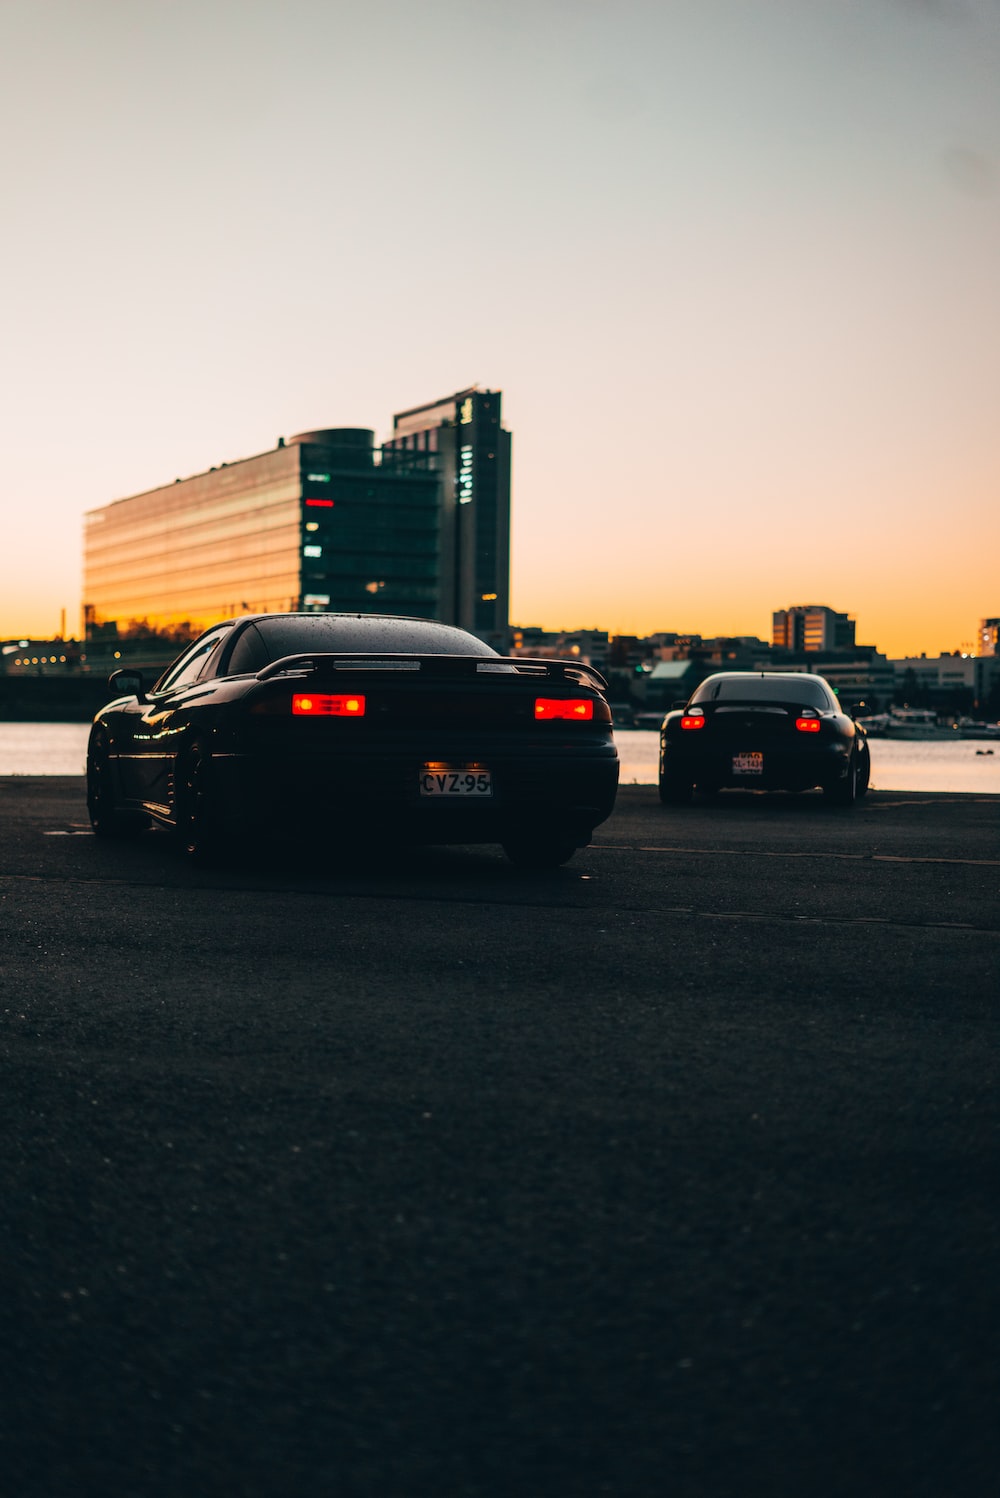 Two cars parked in a parking lot with a city skyline in the background - JDM